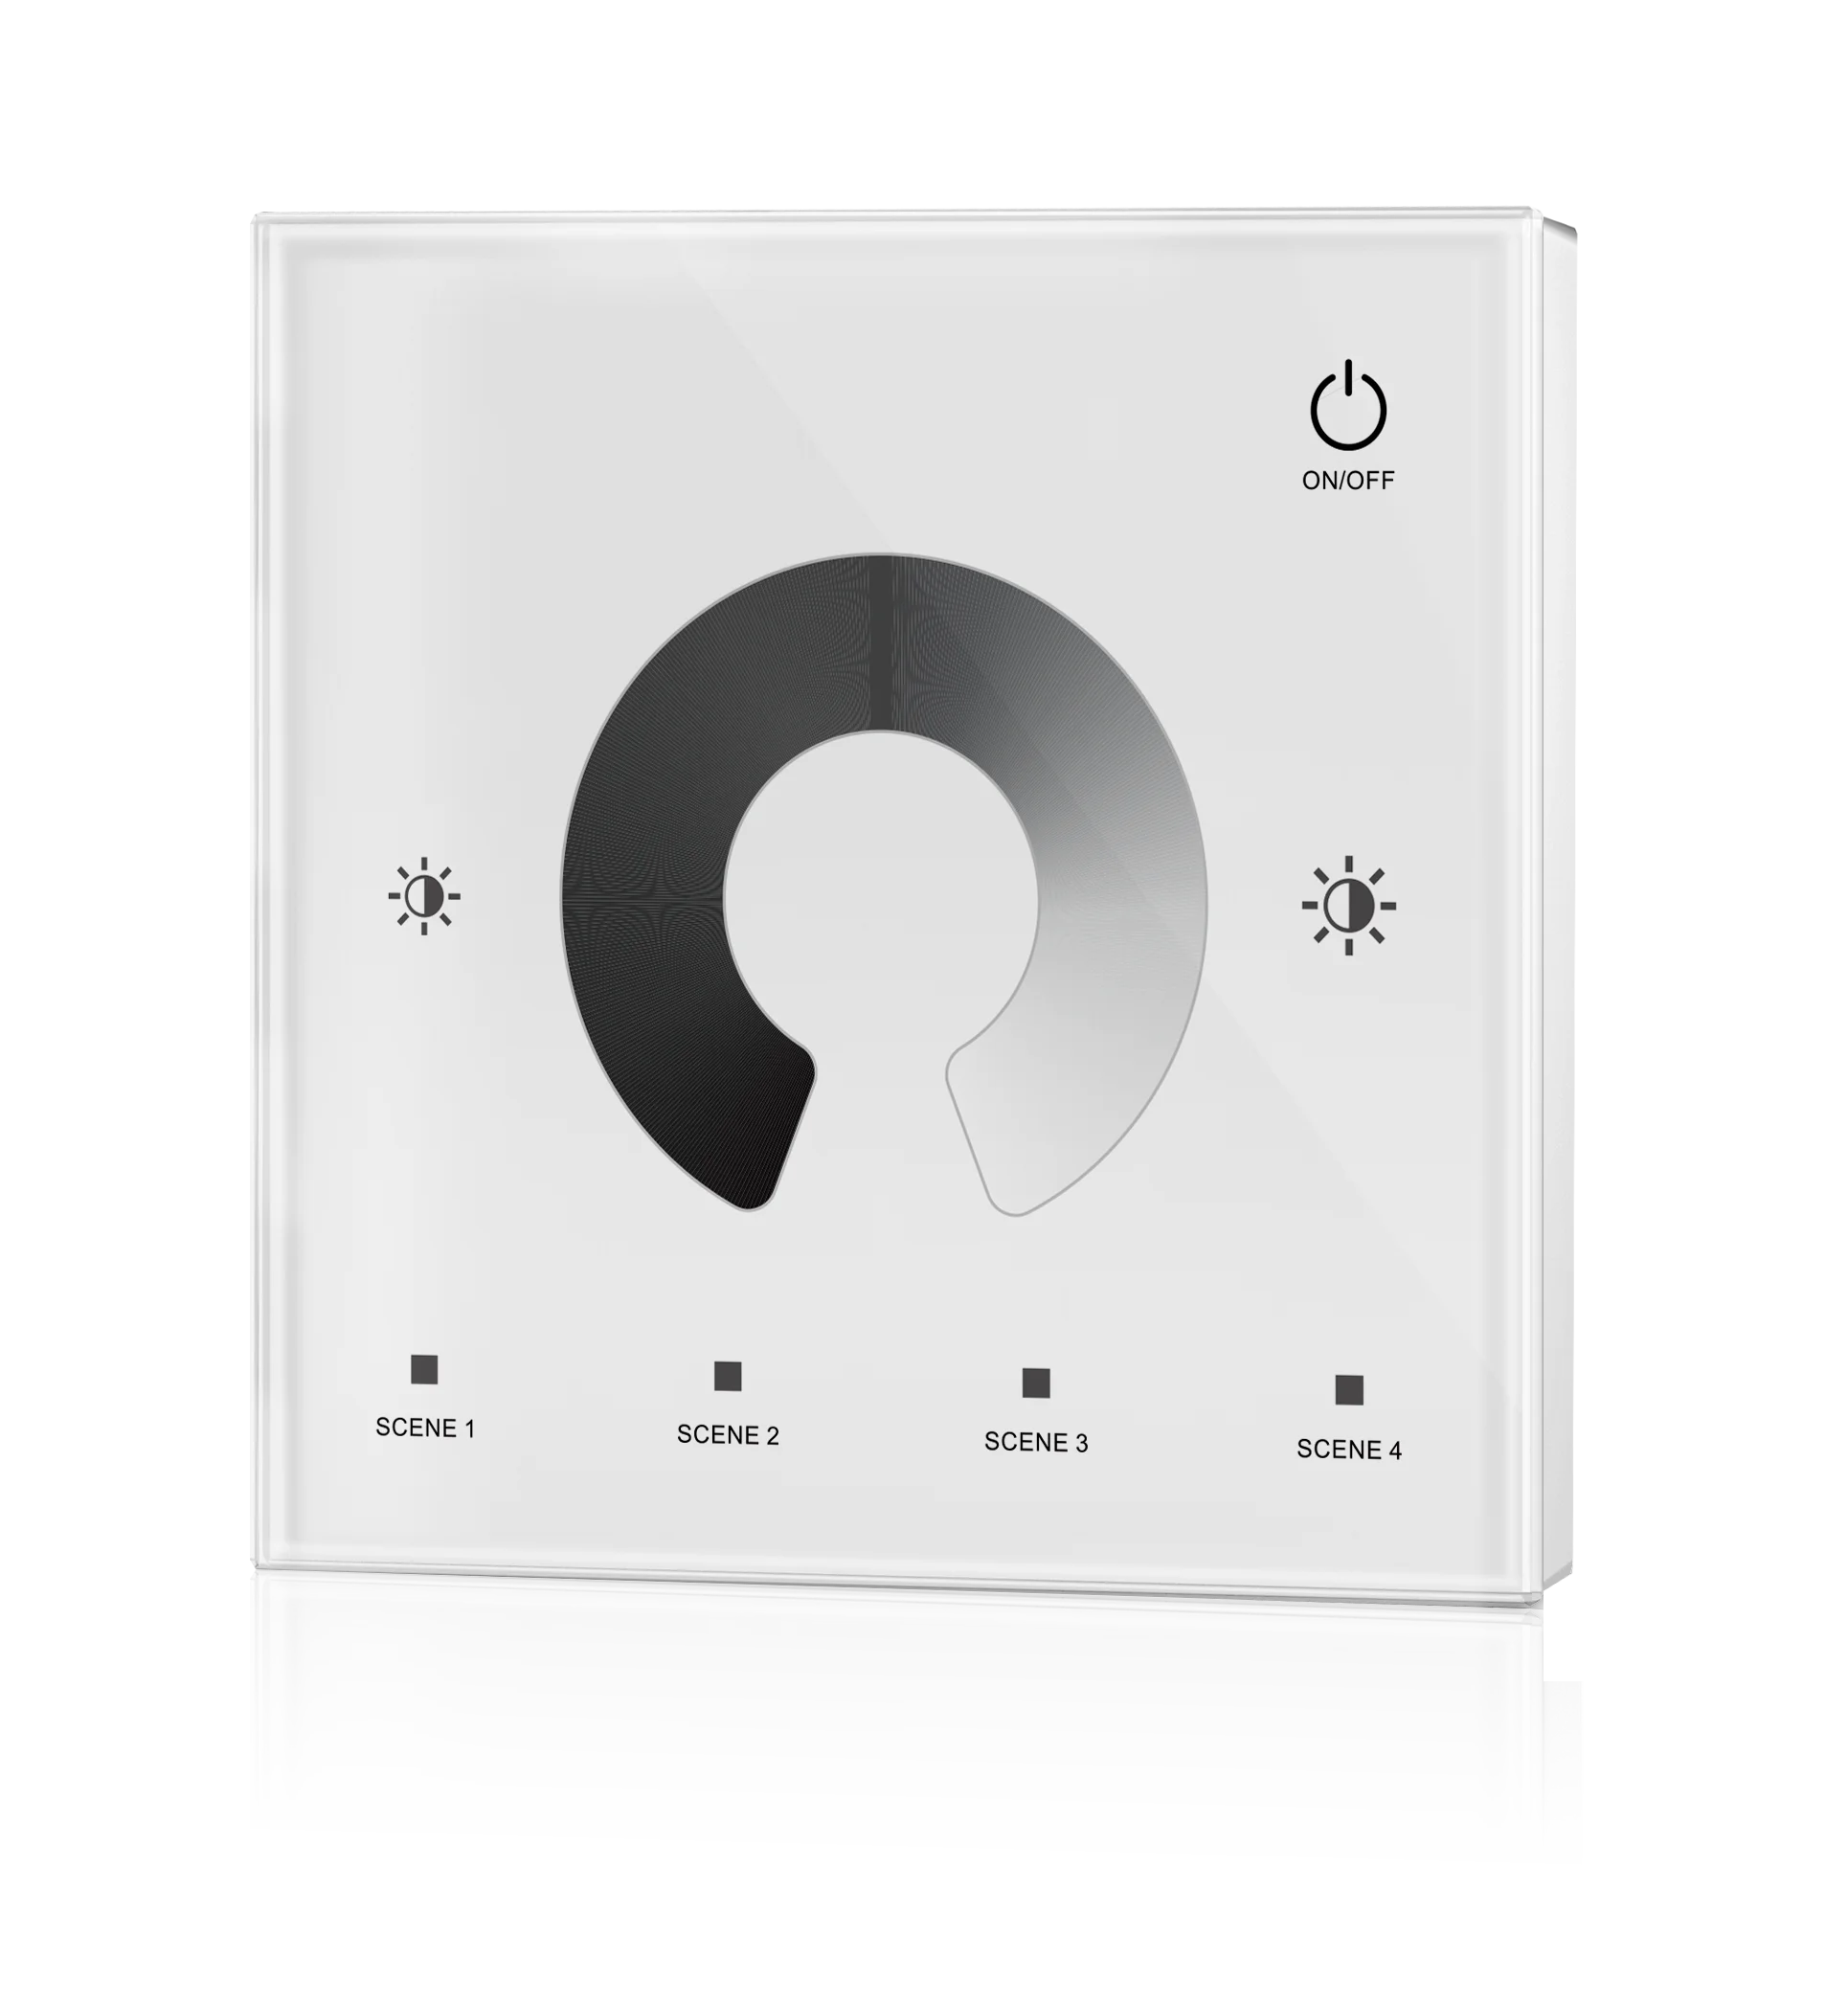 DC12-24V T1, T2, T3, T4 single color, dual color, RGB or RGBW PWM constant voltage wall mounted touch panel controller dimmer